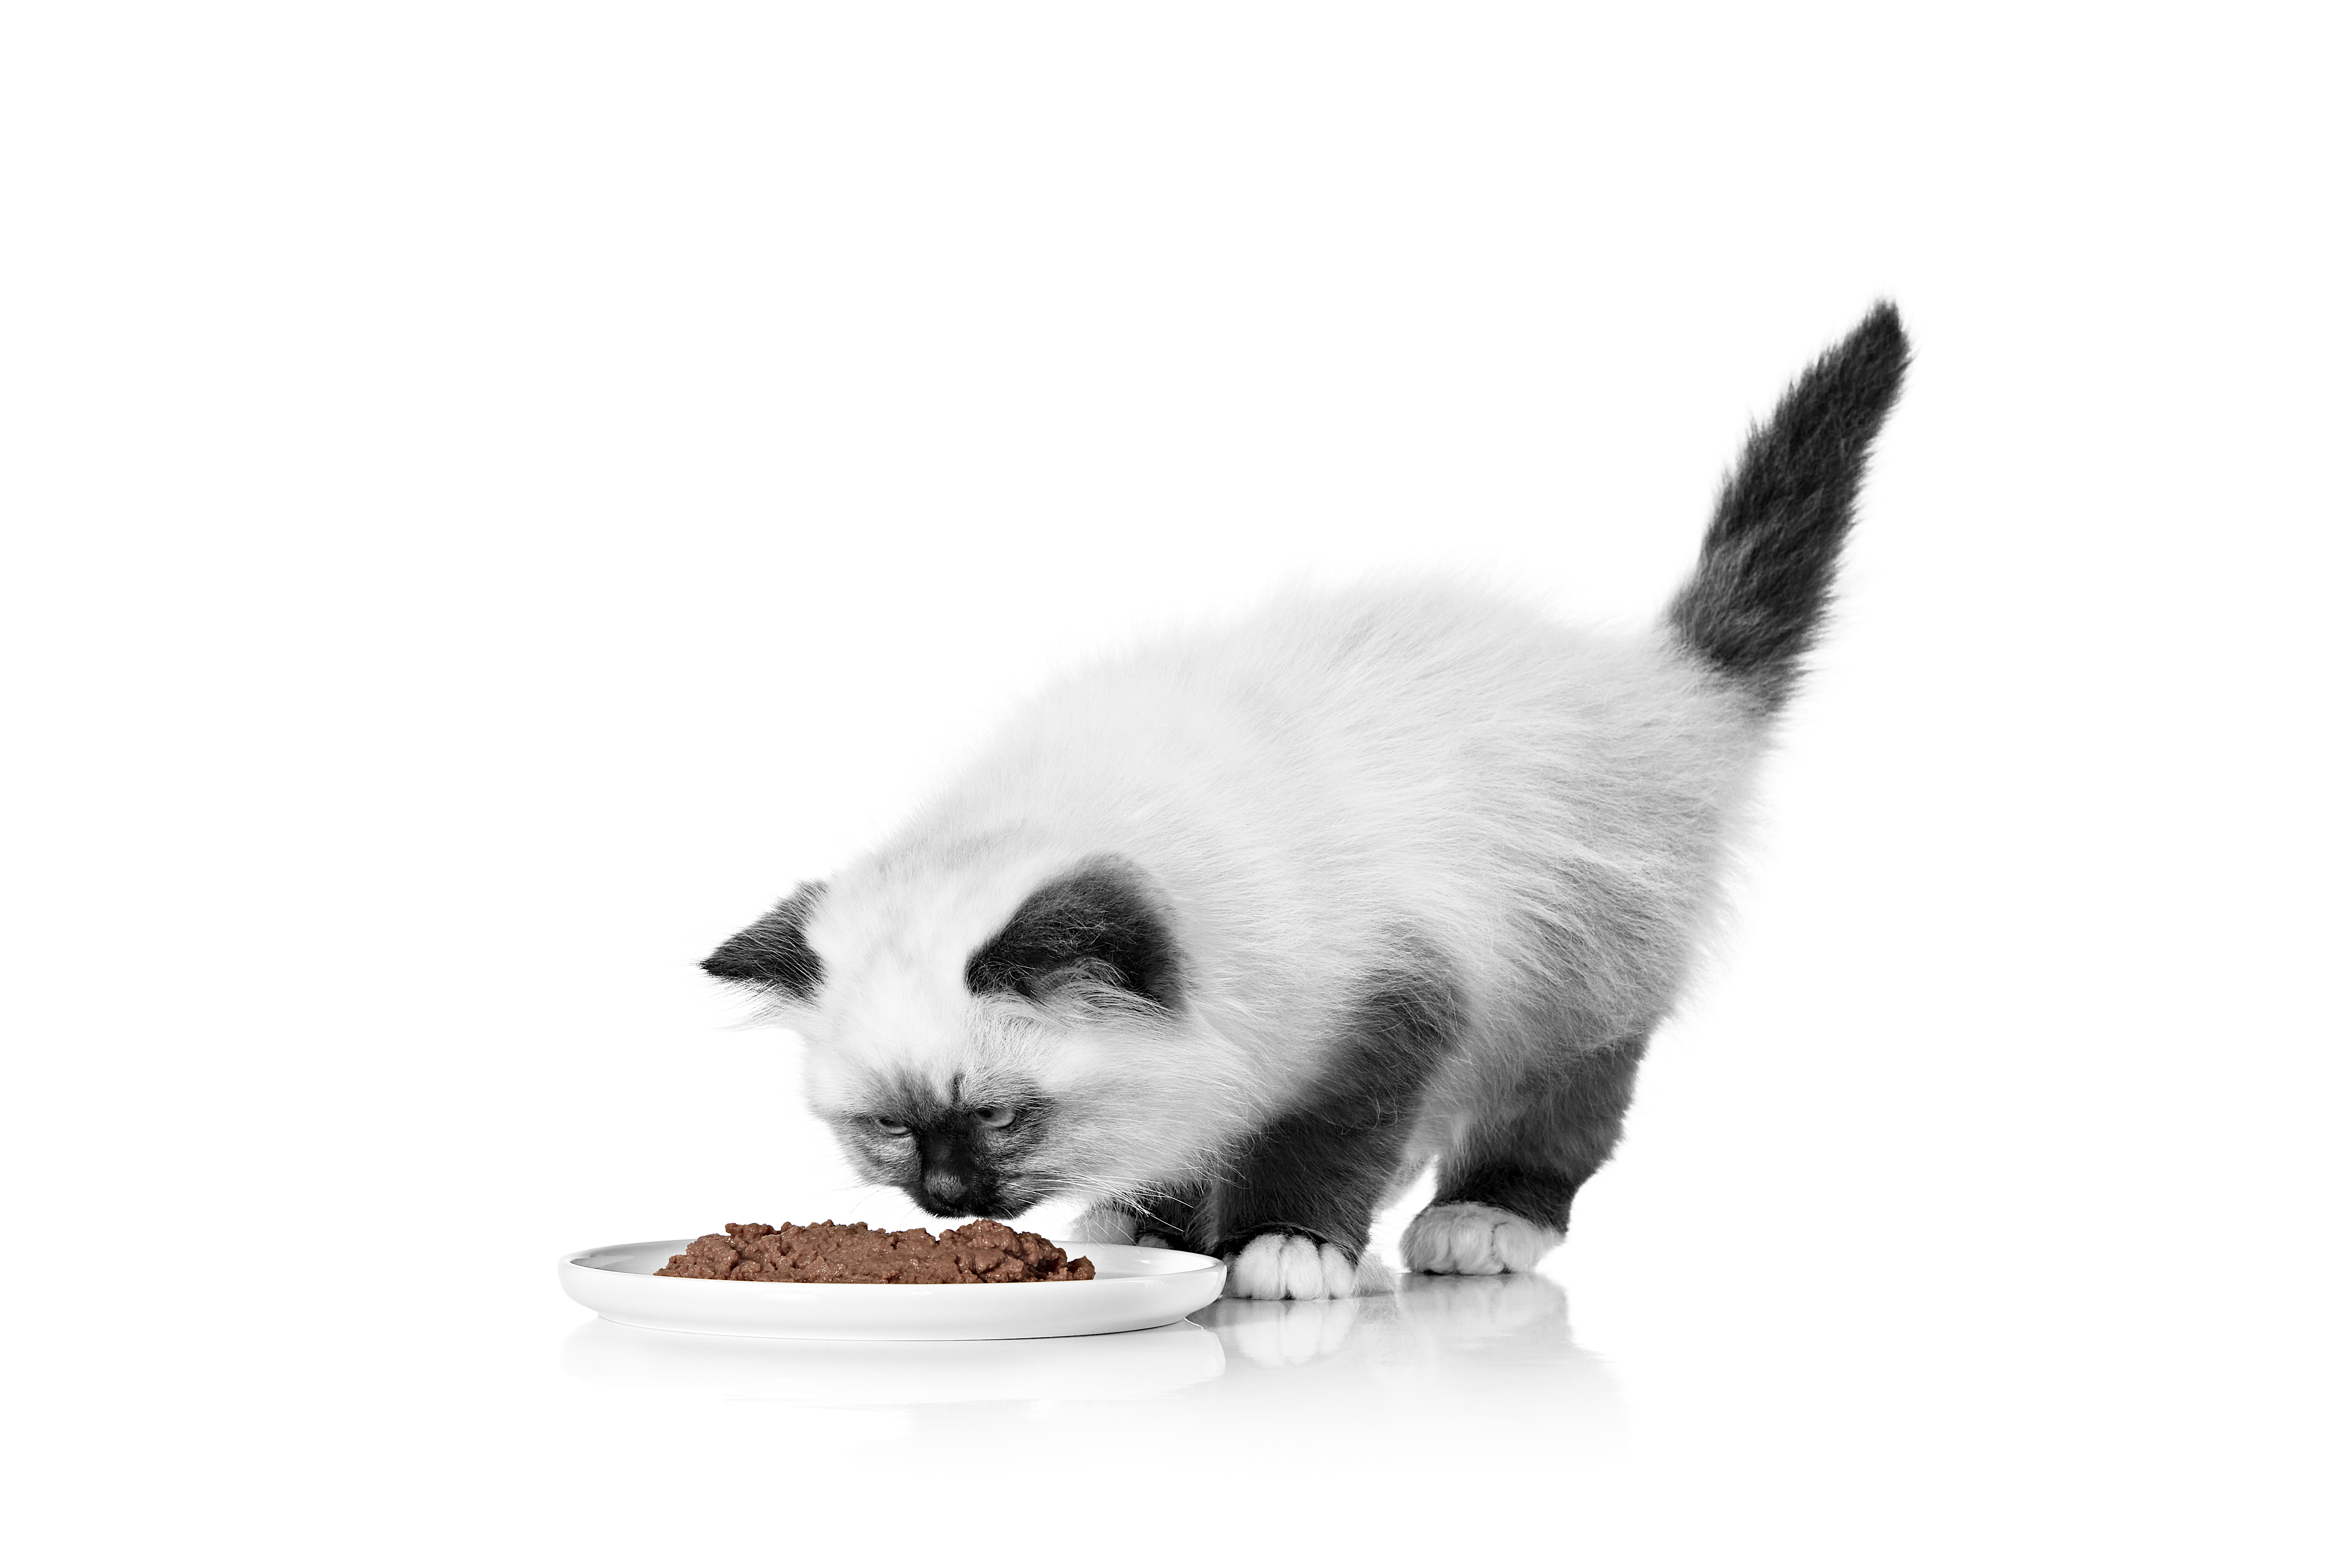 Sacred Birman kitten in black and white eating from a white dish